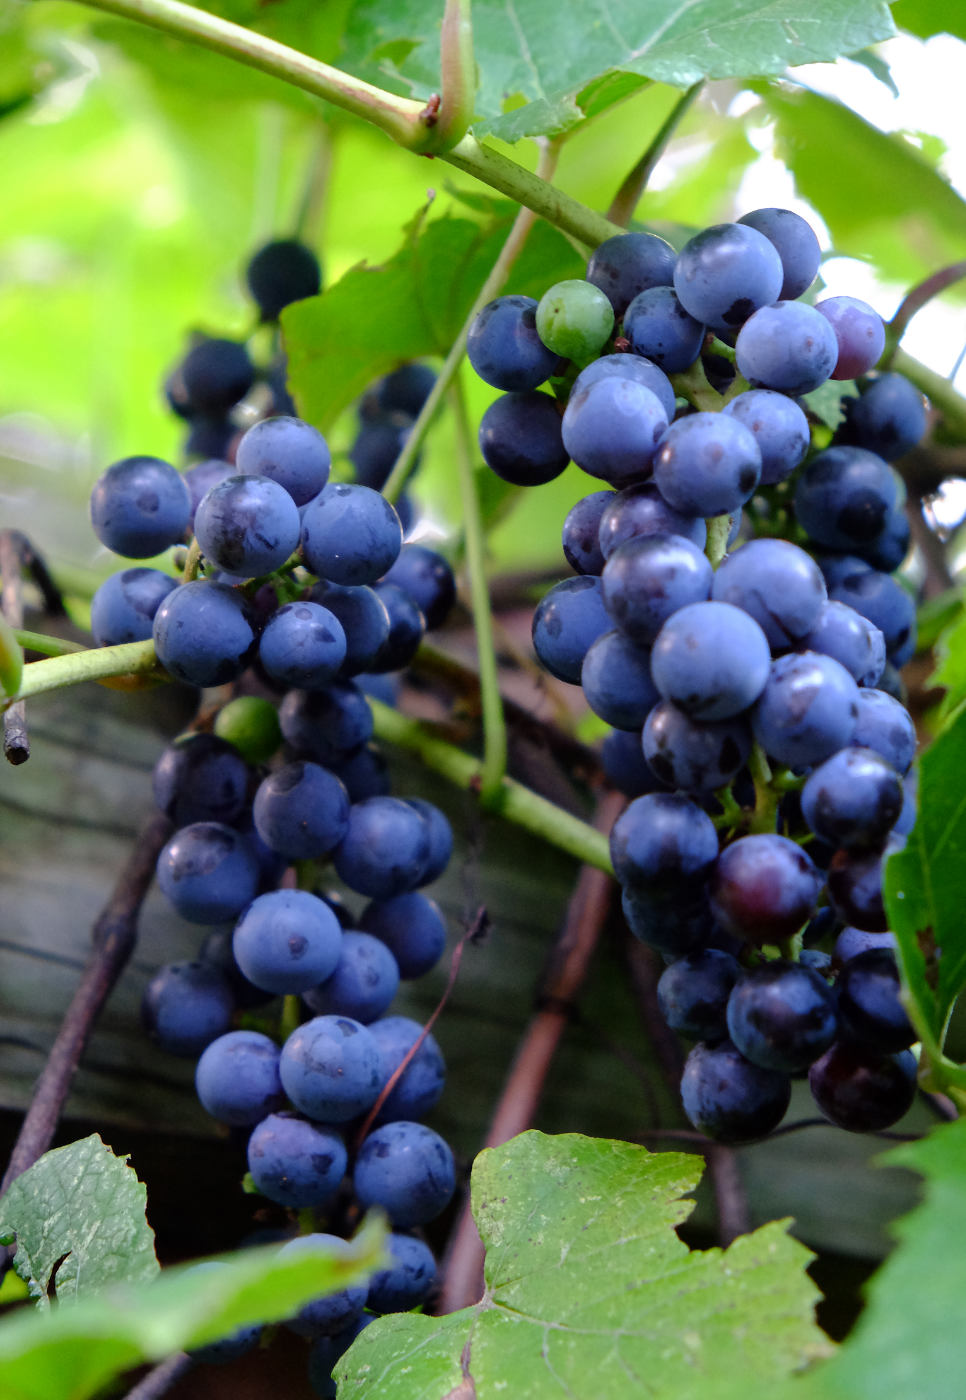 Double bunch of ripe purple grapes with green vine and lease